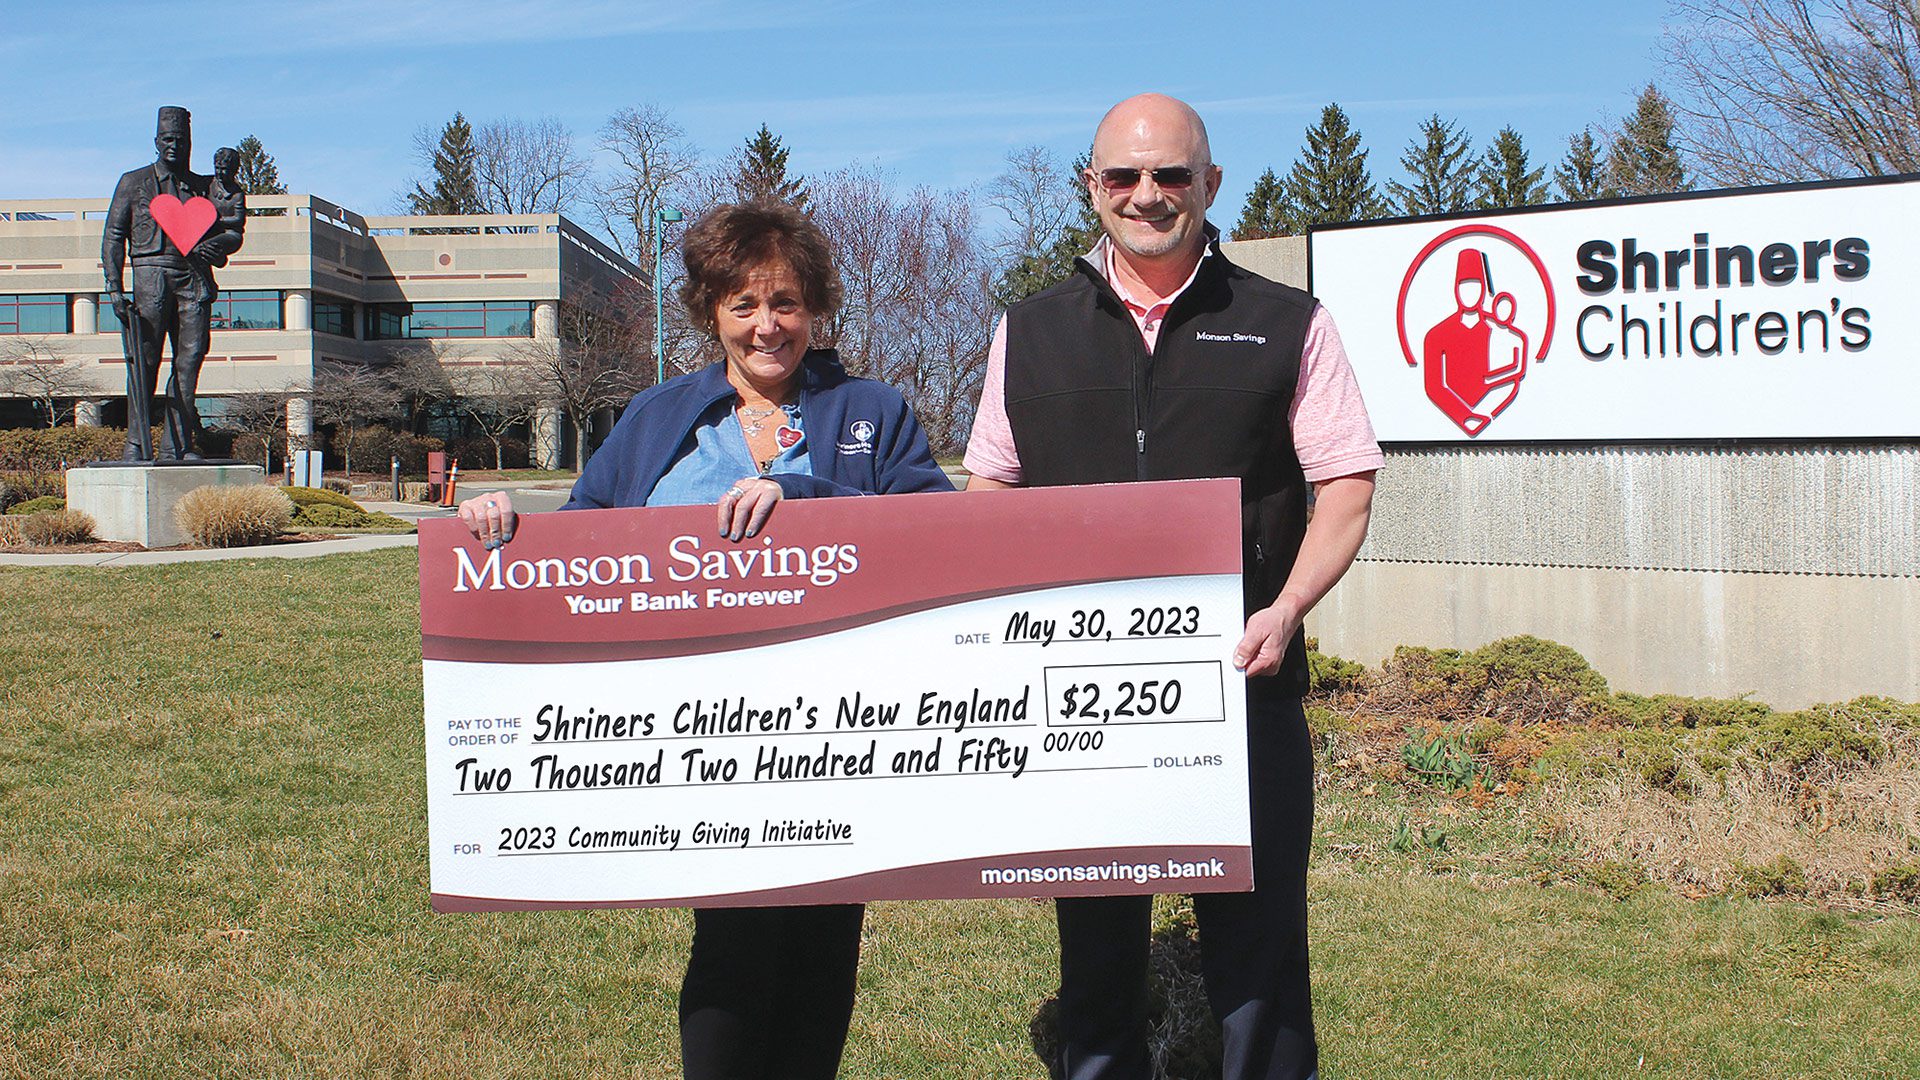 Monson Savings Bank President and CEO Dan Moriarty recently presented a $2,250 donation to Stacey Perlmutter, director of Development for Shriners Children’s New England